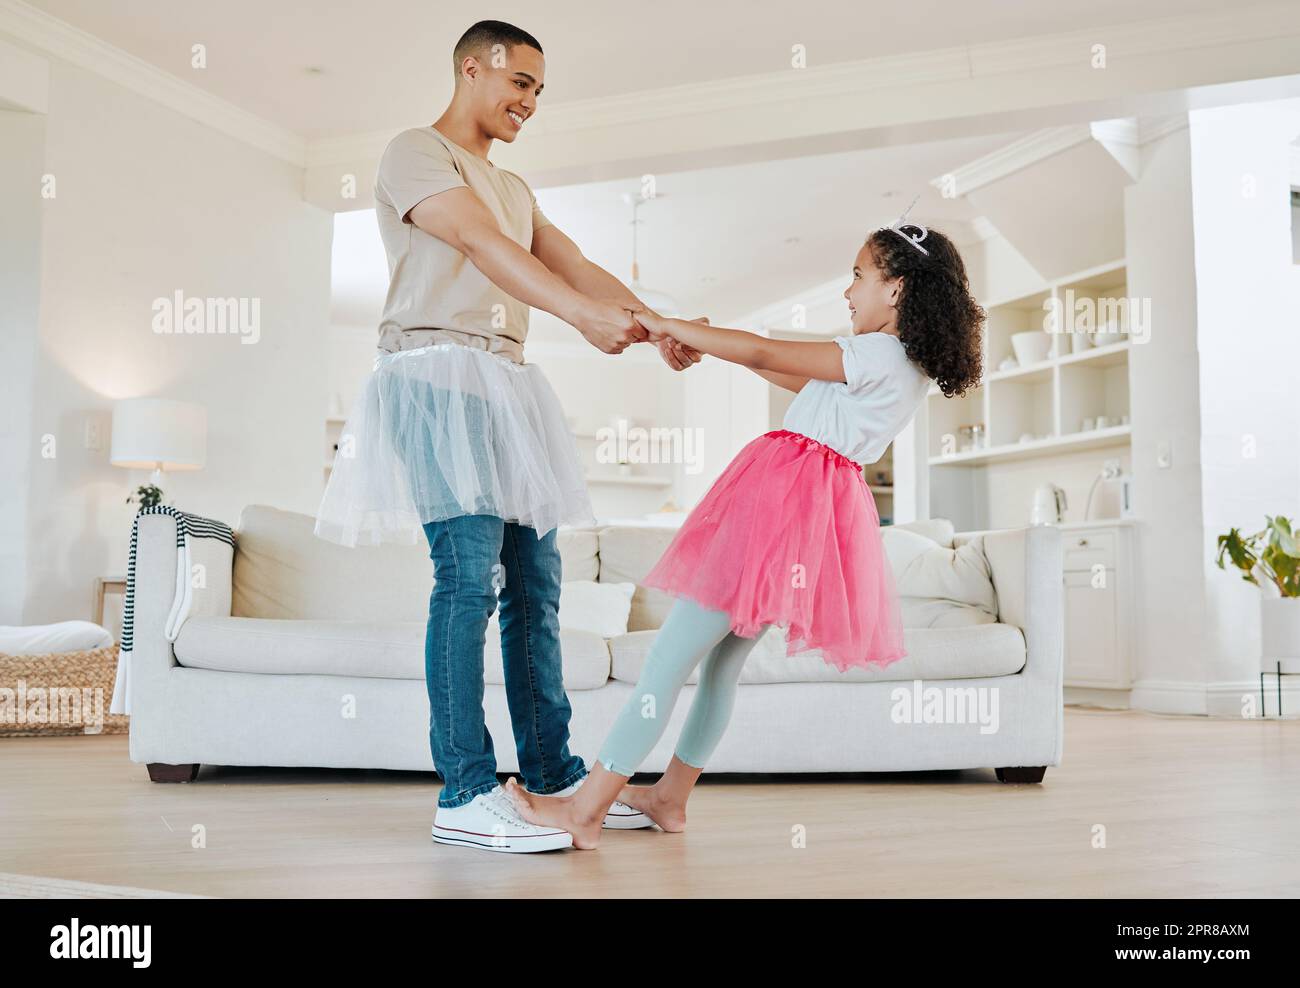 You spin me right round dad. Shot of a father dancing with his daughter in the living room at home. Stock Photo